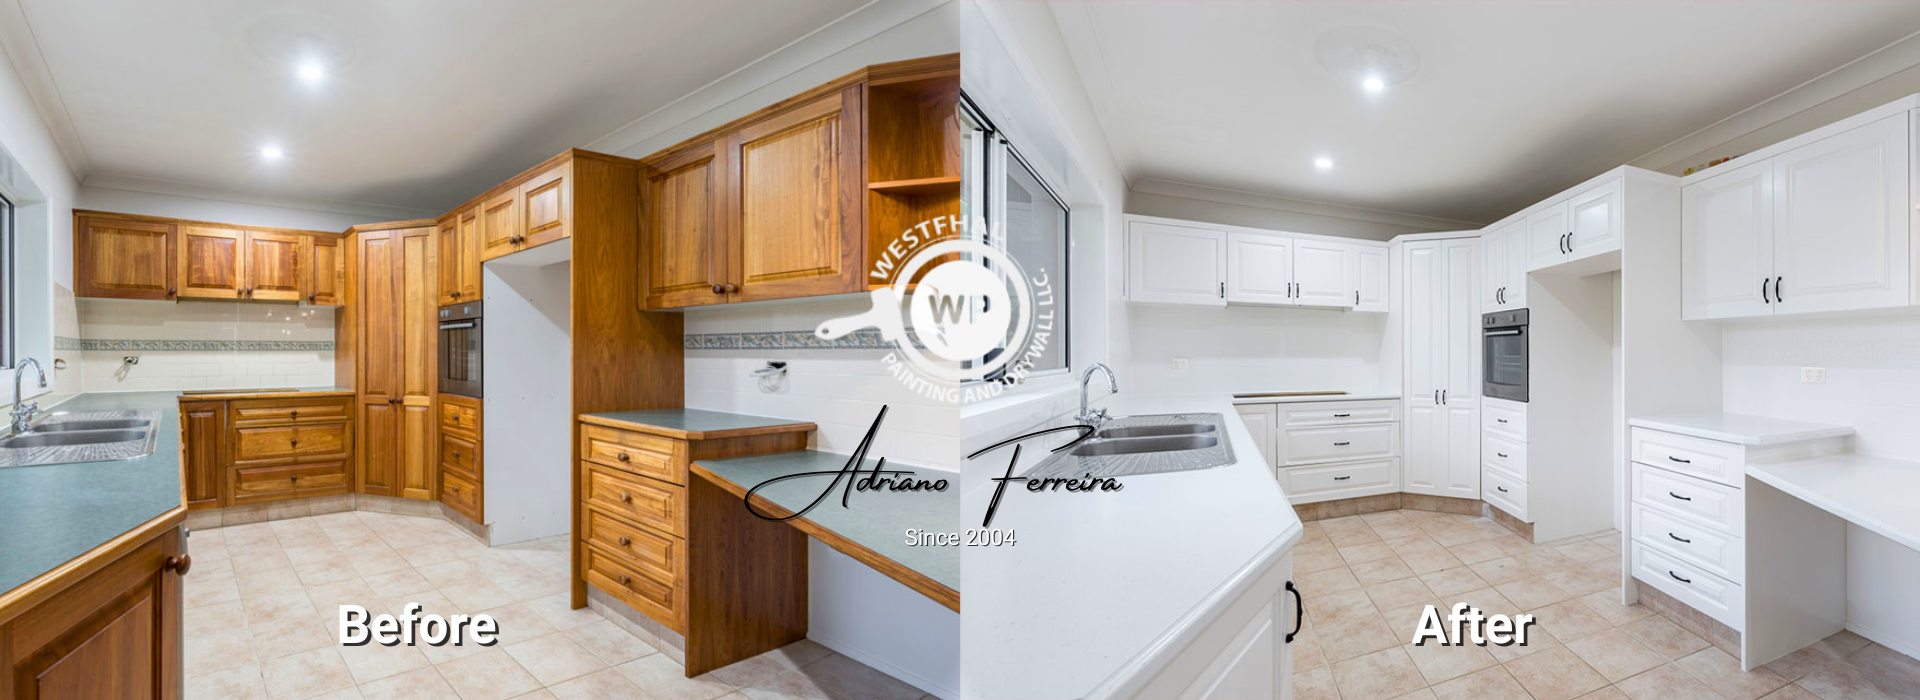 Before and after image of a kitchen cabinet painting project showing old wooden cabinets transformed into modern white cabinets.